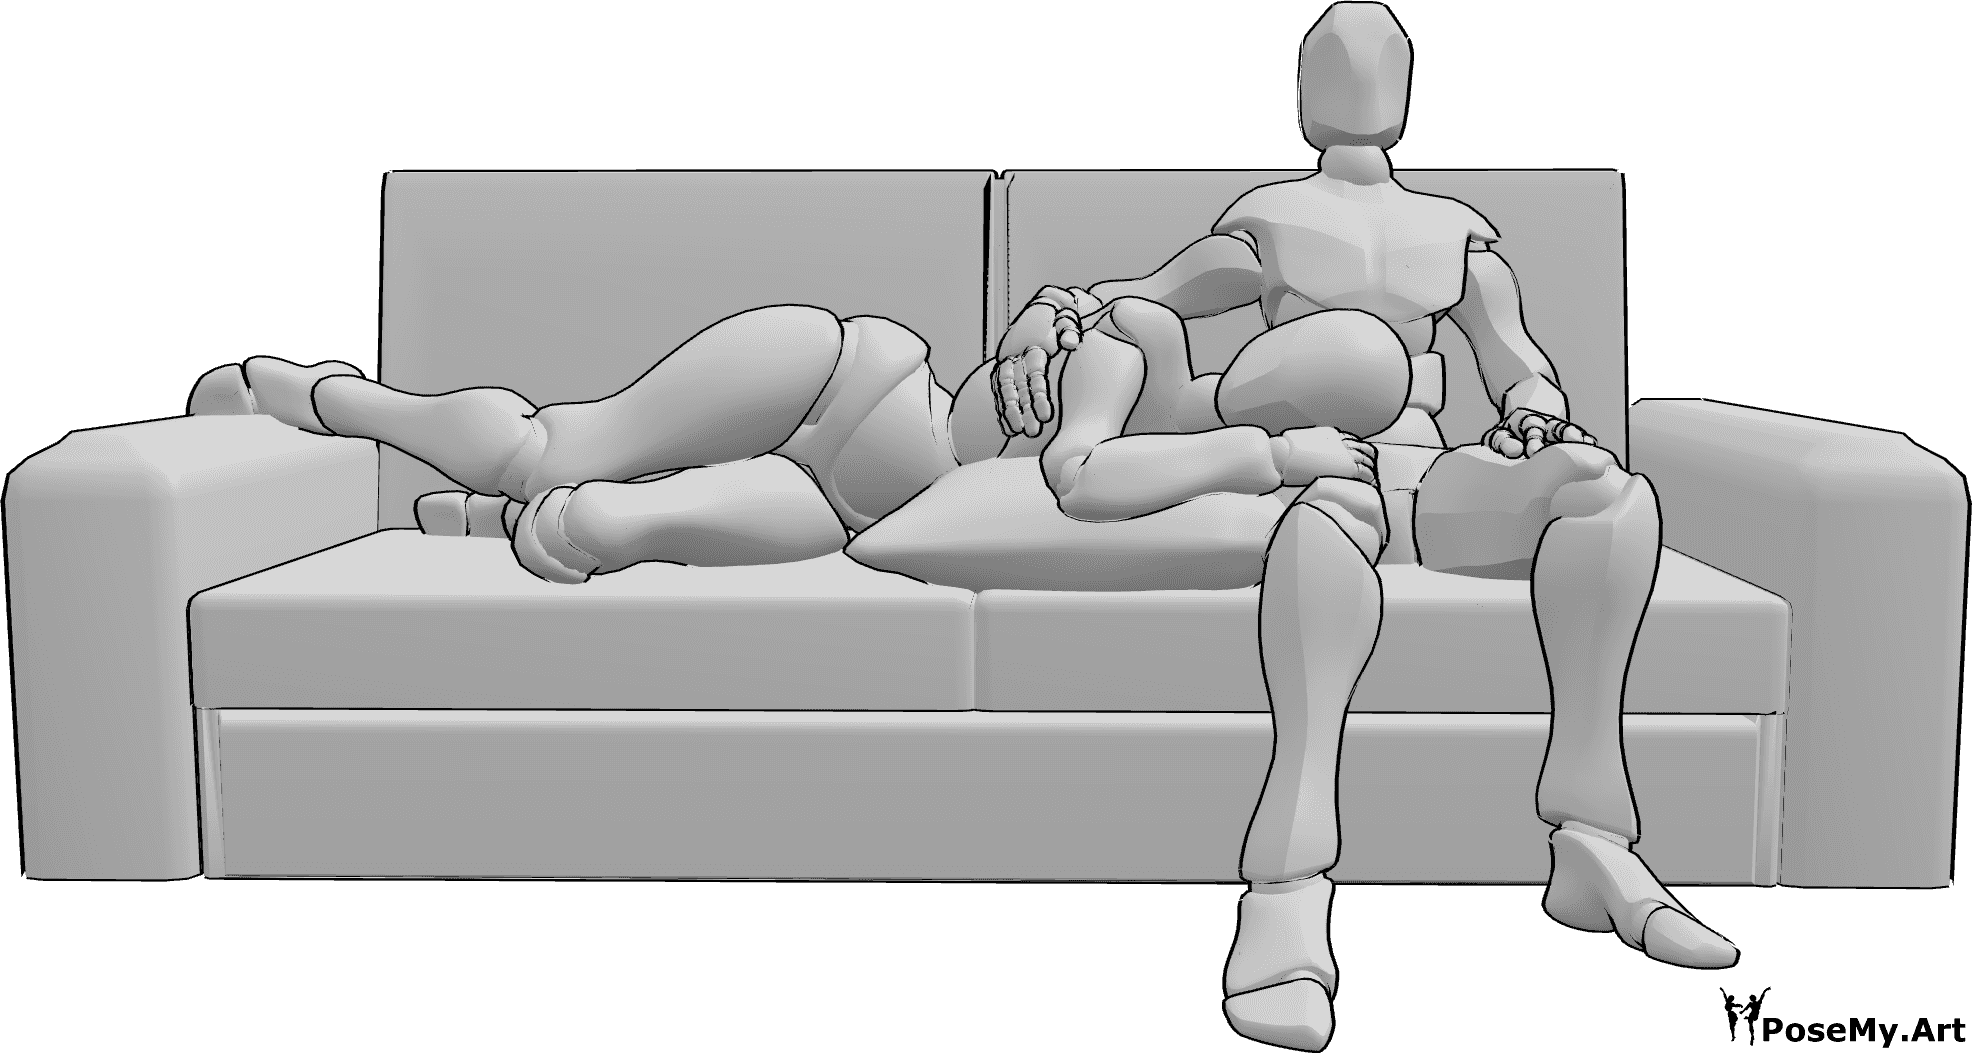 Pose Reference - Watching TV together pose - Female and male couple is watching TV together on the sofa, female is lying on the male